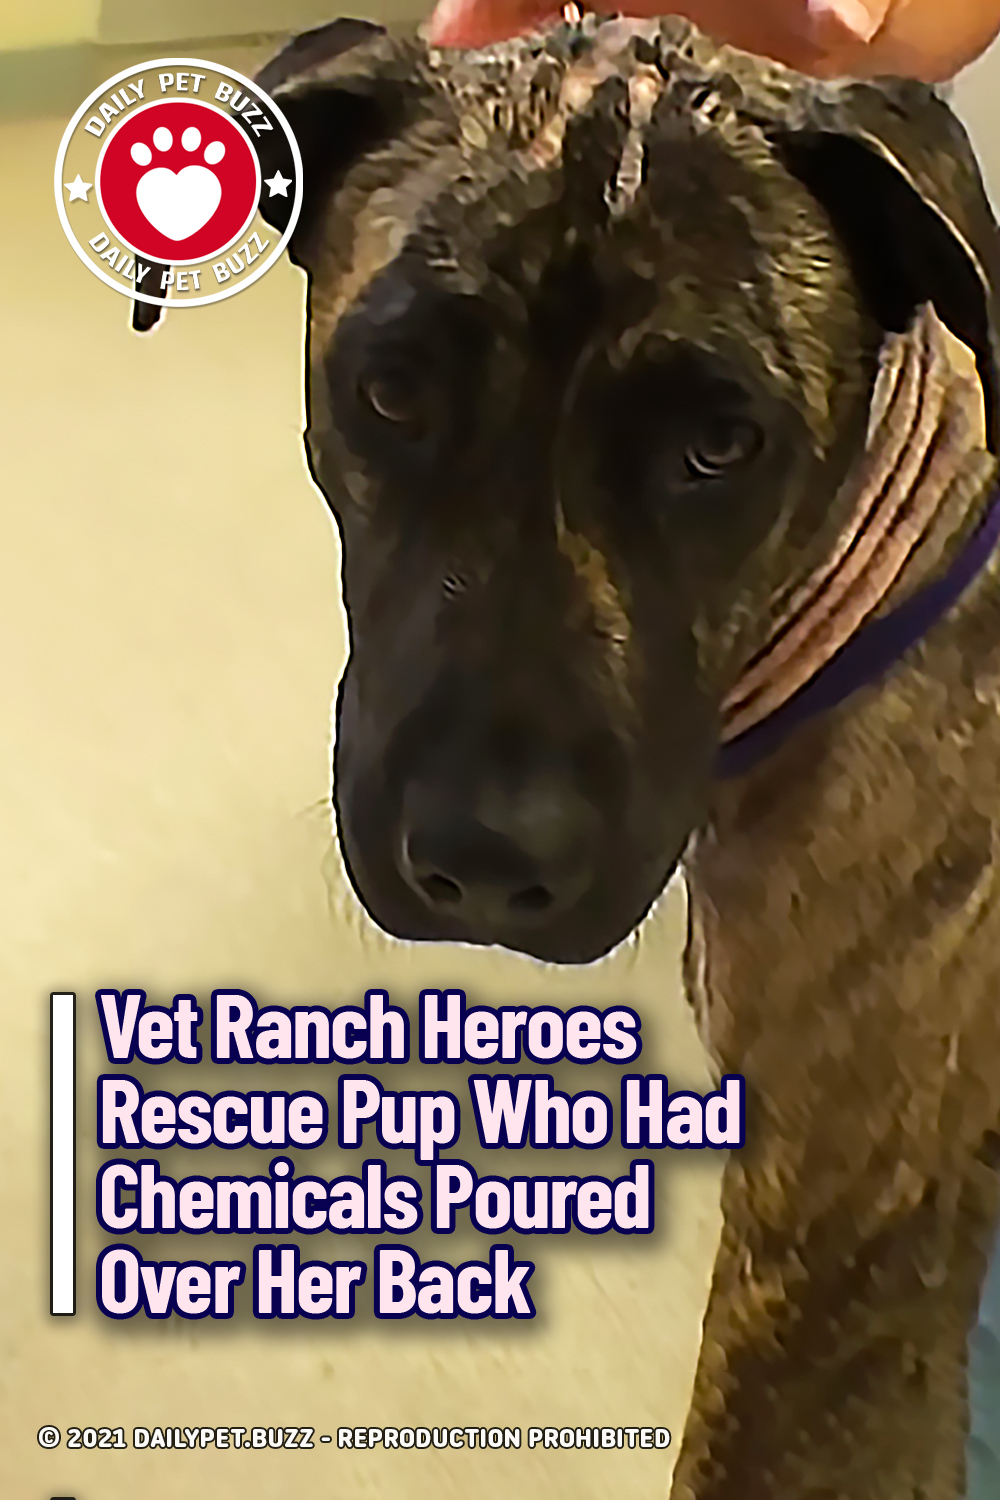 Vet Ranch Heroes Rescue Pup Who Had Chemicals Poured Over Her Back